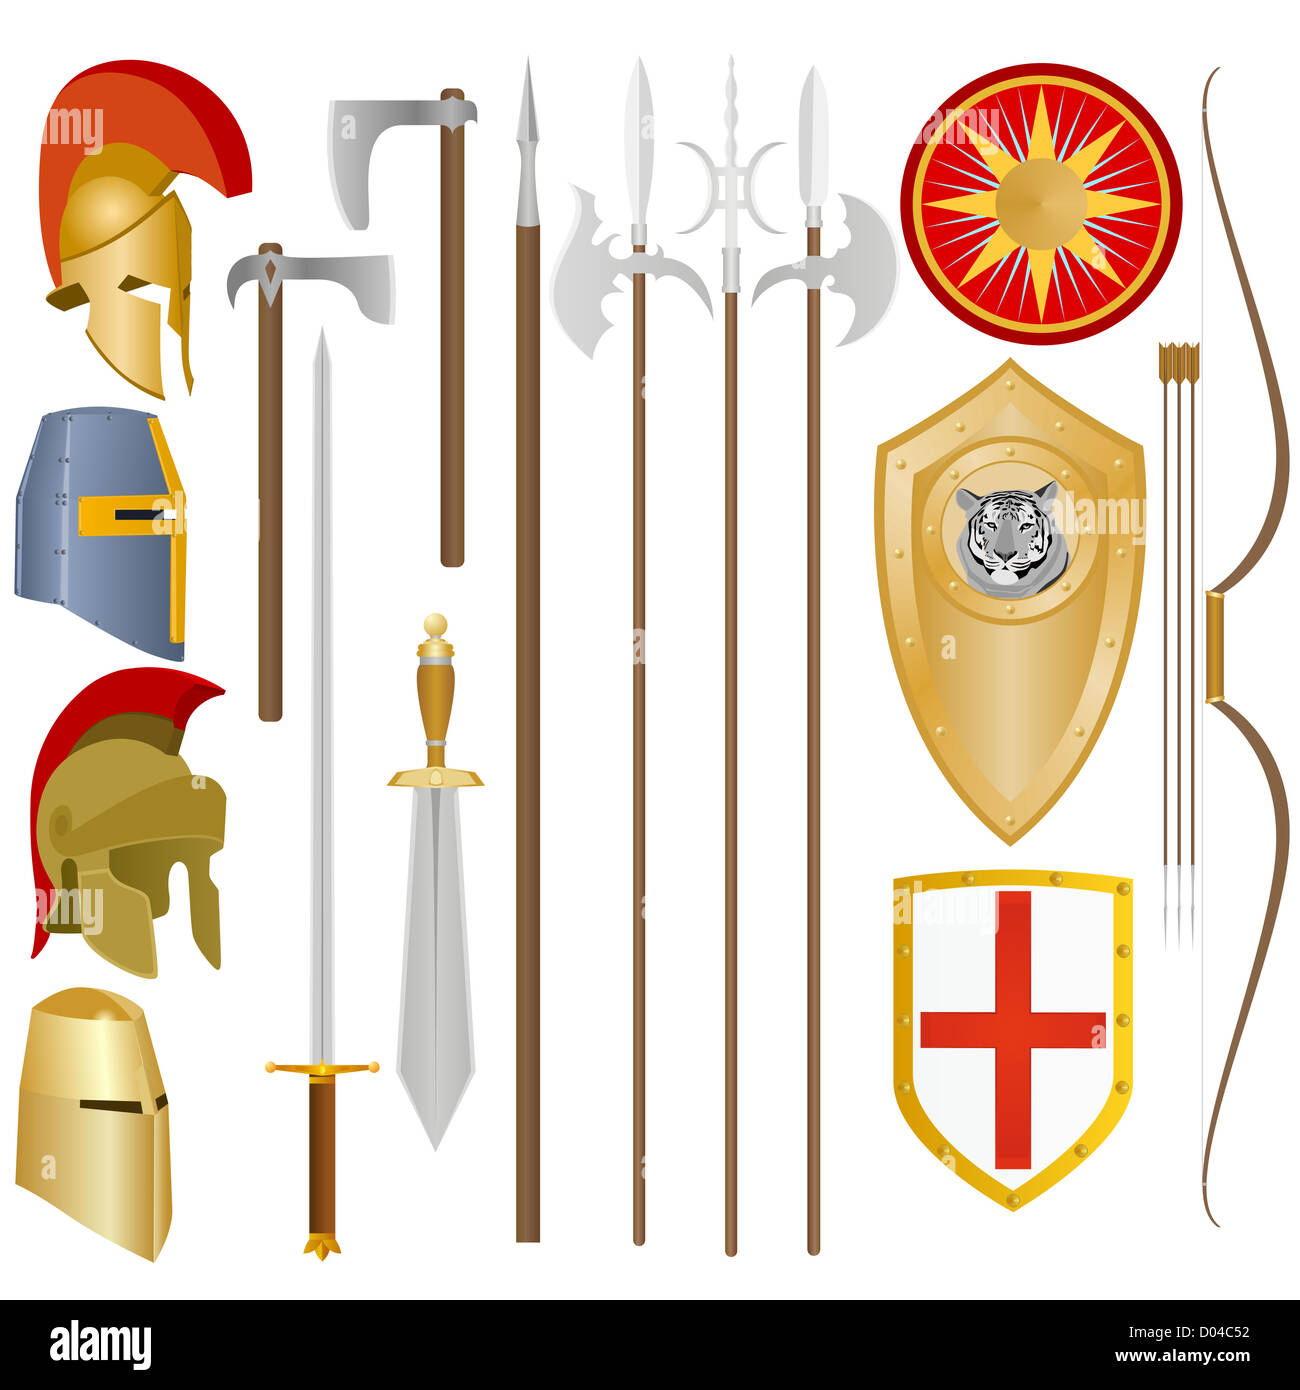 Weapon and armor of the ancient soldier. An illustration on a white background. Stock Photo